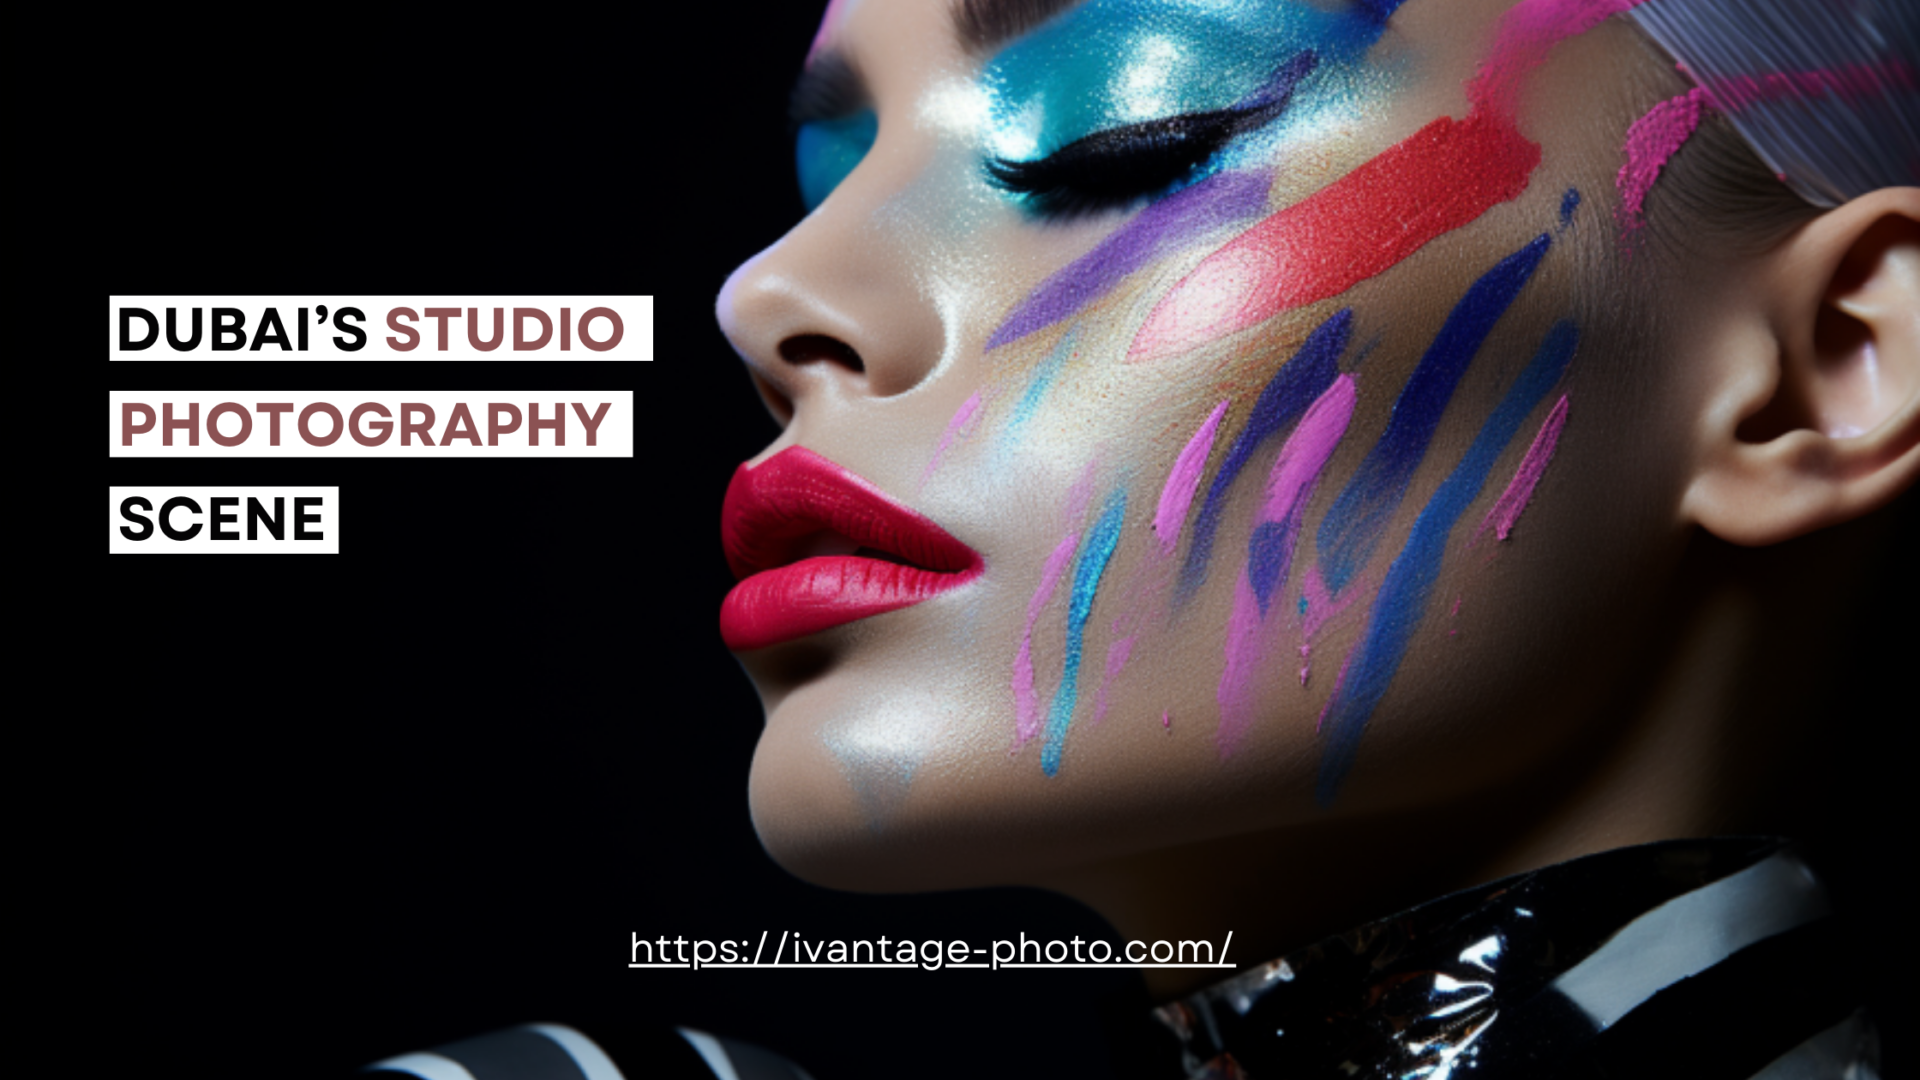 A close-up of a model, her face adorned with avant-garde makeup. The image is shot in a studio setting, with dramatic lighting that accentuates the textures and colors of her makeup and outfit. This picture exemplifies the artistry and creativity involved in editorial photography.